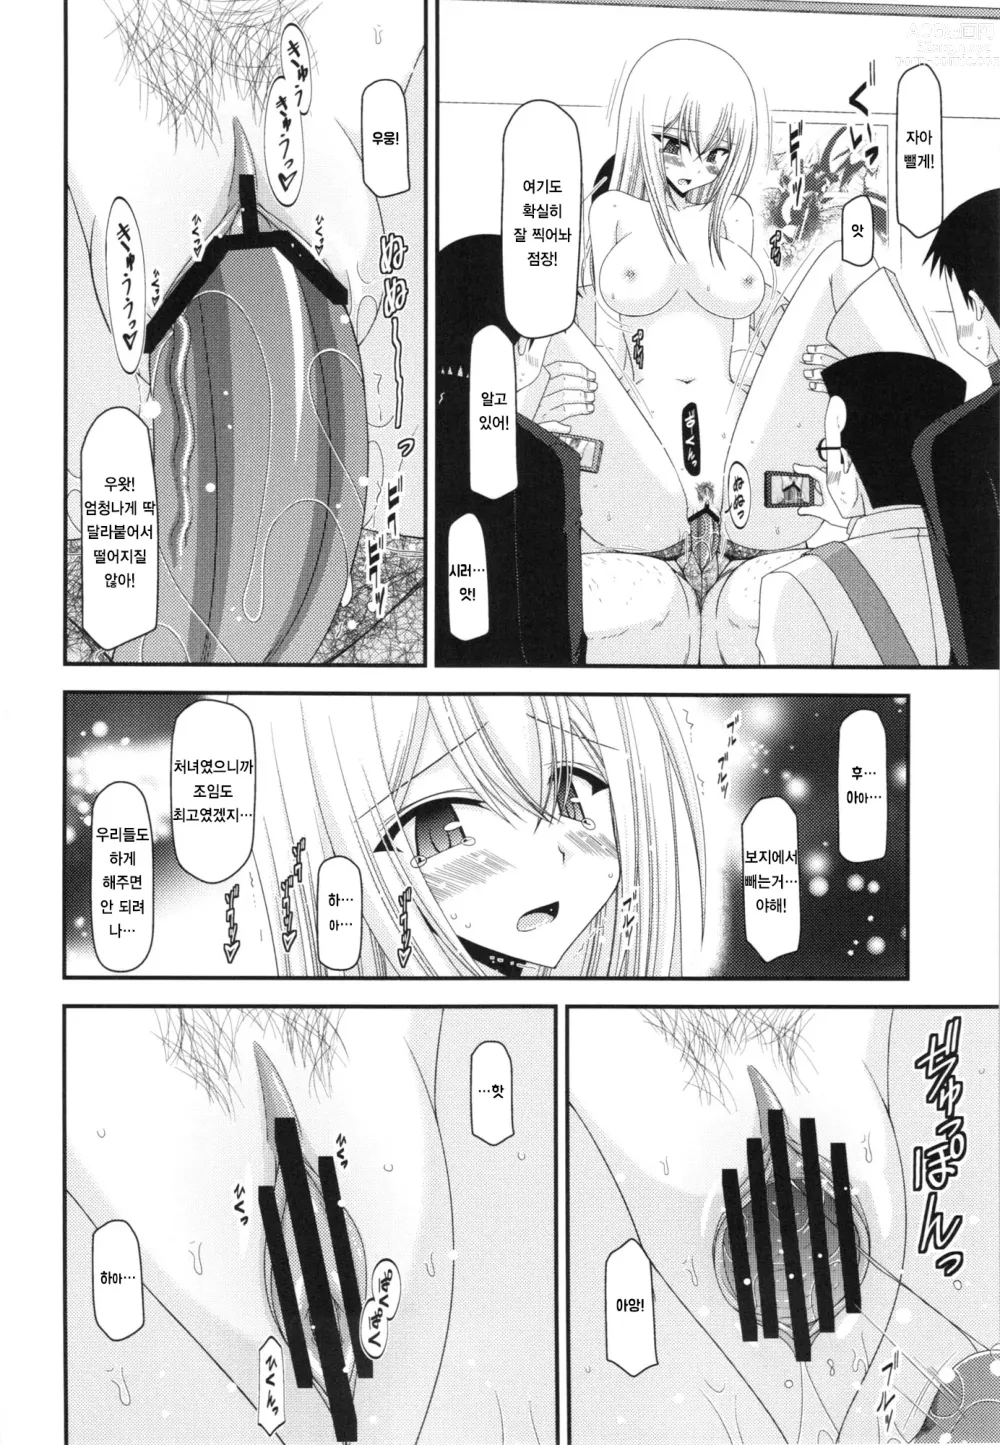 Page 52 of doujinshi Unbreakable Limit